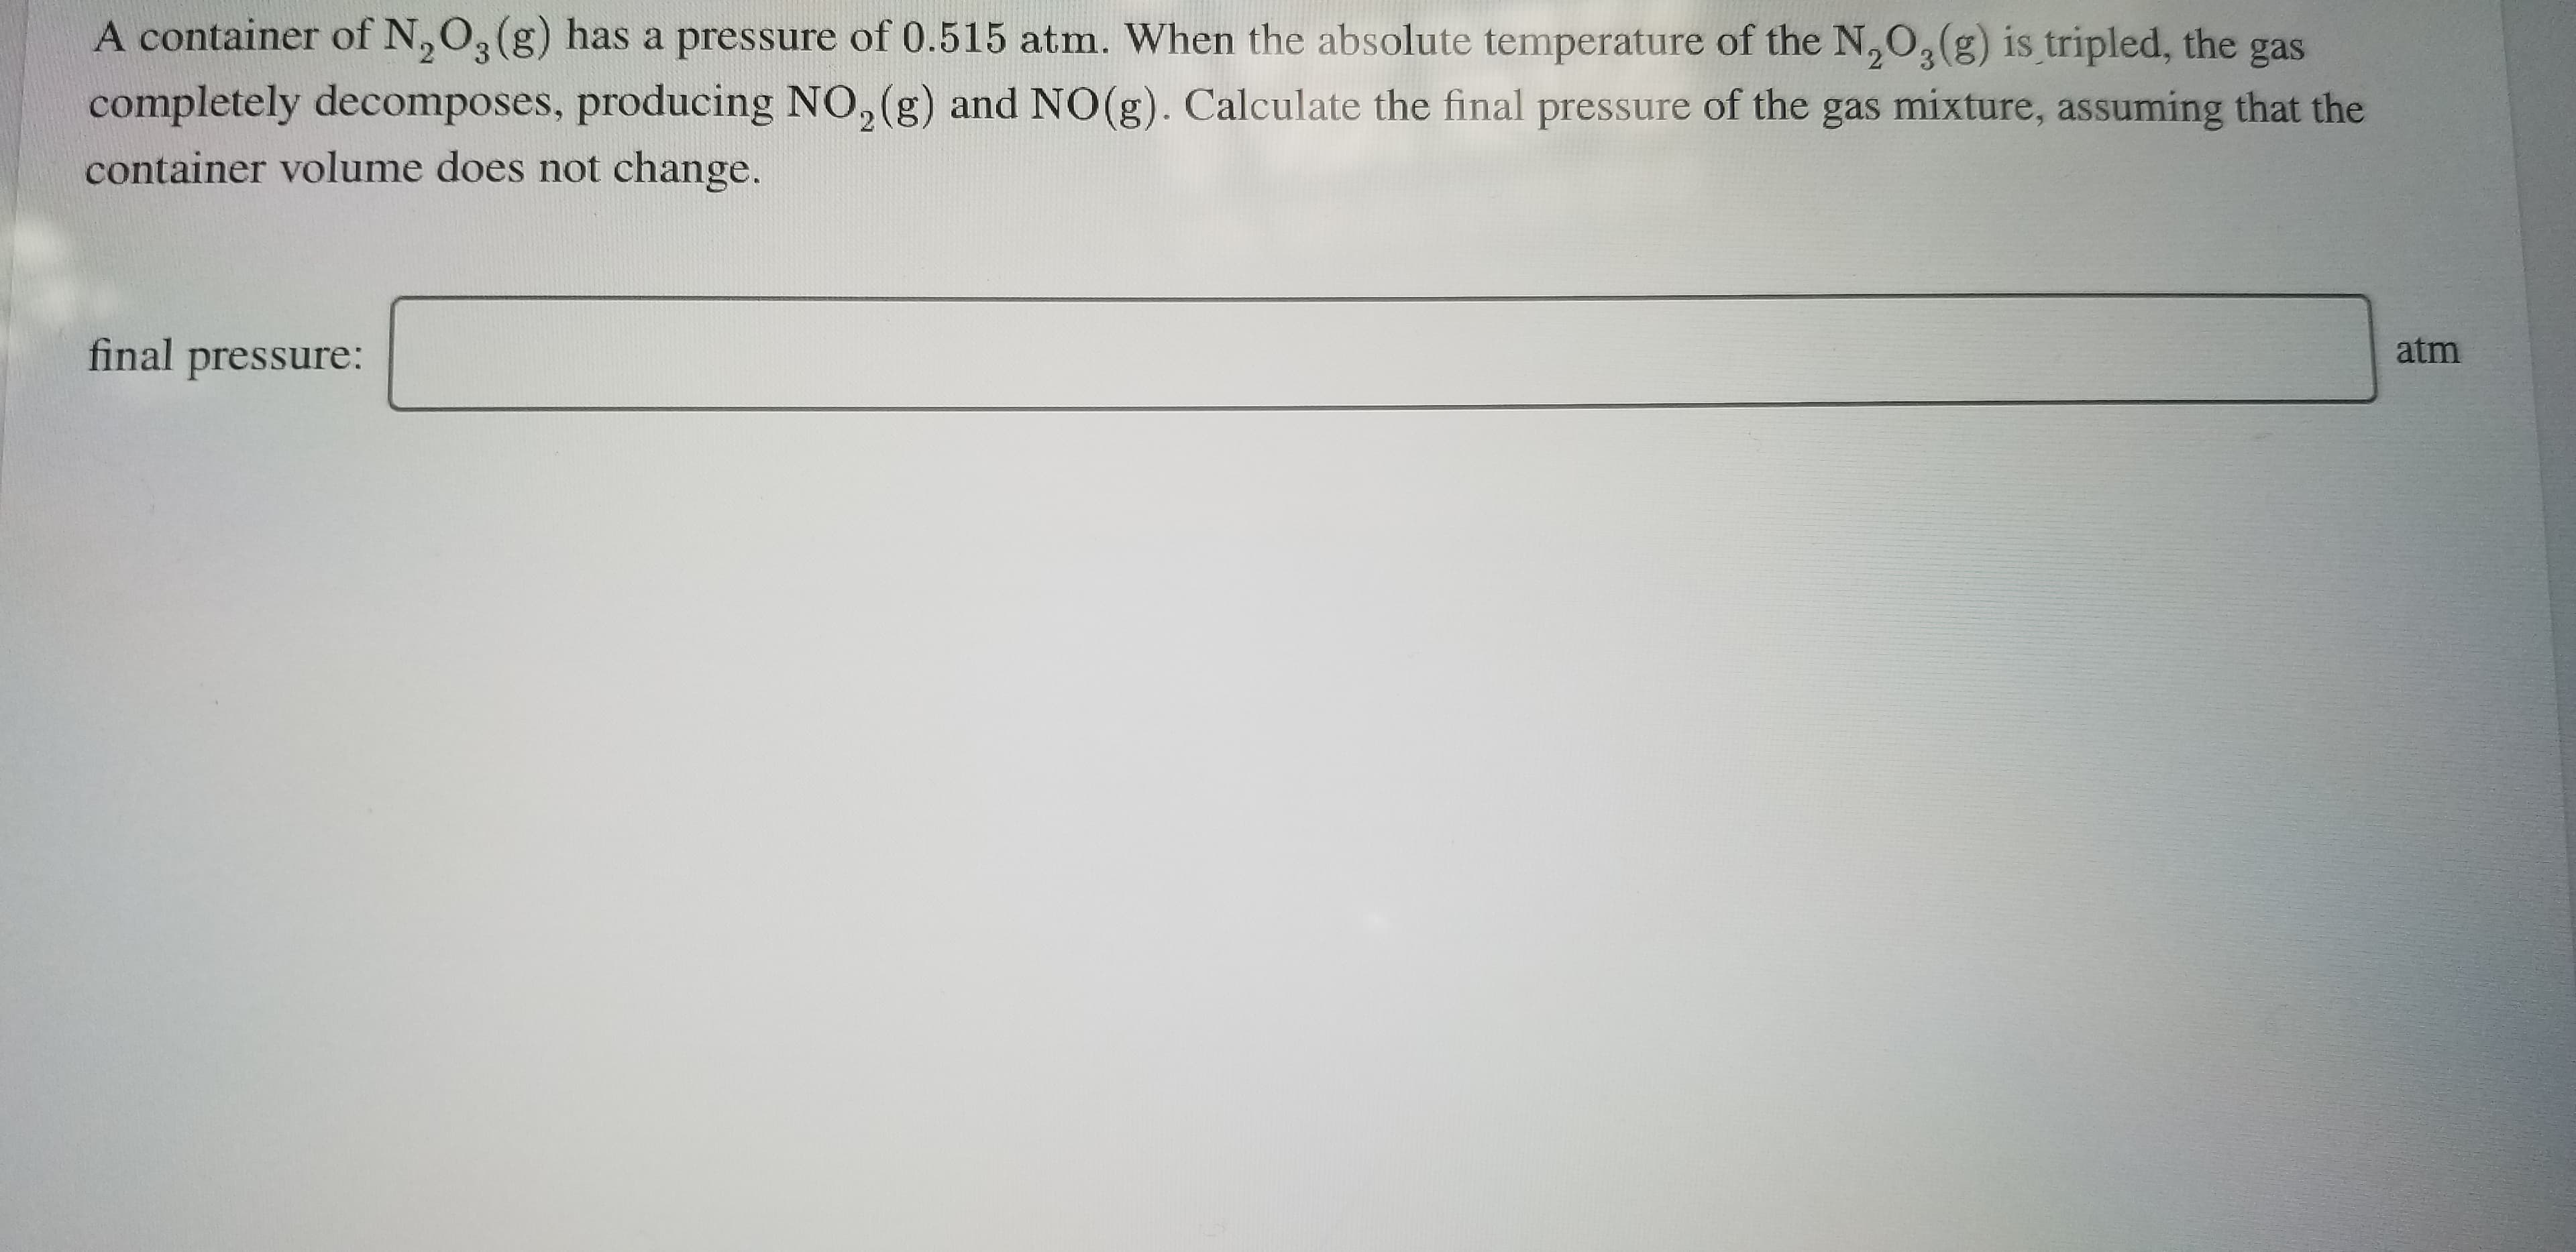 A container of N,O, (g) has a pressure of 0.515 atm. When the absolute temperature of the N,O,(g) is tripled, the gas
completely decomposes, producing NO, (g) and NO(g). Calculate the final pressure of the gas mixture, assuming that the
container volume does not change.
final pressure:
atm
